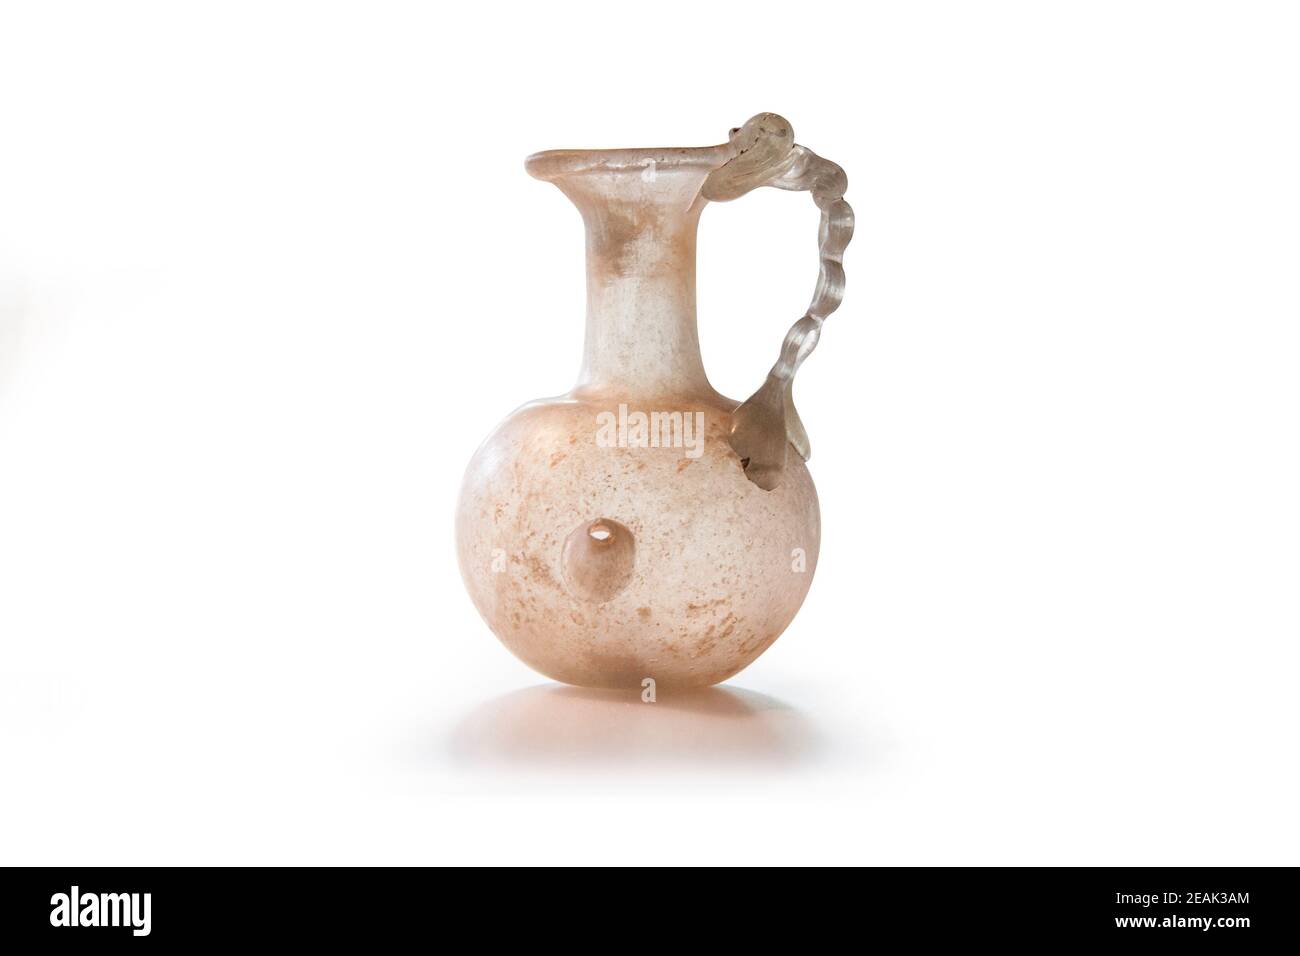 Ancient Roman jug with chain handle. Natural-coloured Glass of the 1st and 2nd centuries AD. Clipping path for design purposes. Stock Photo